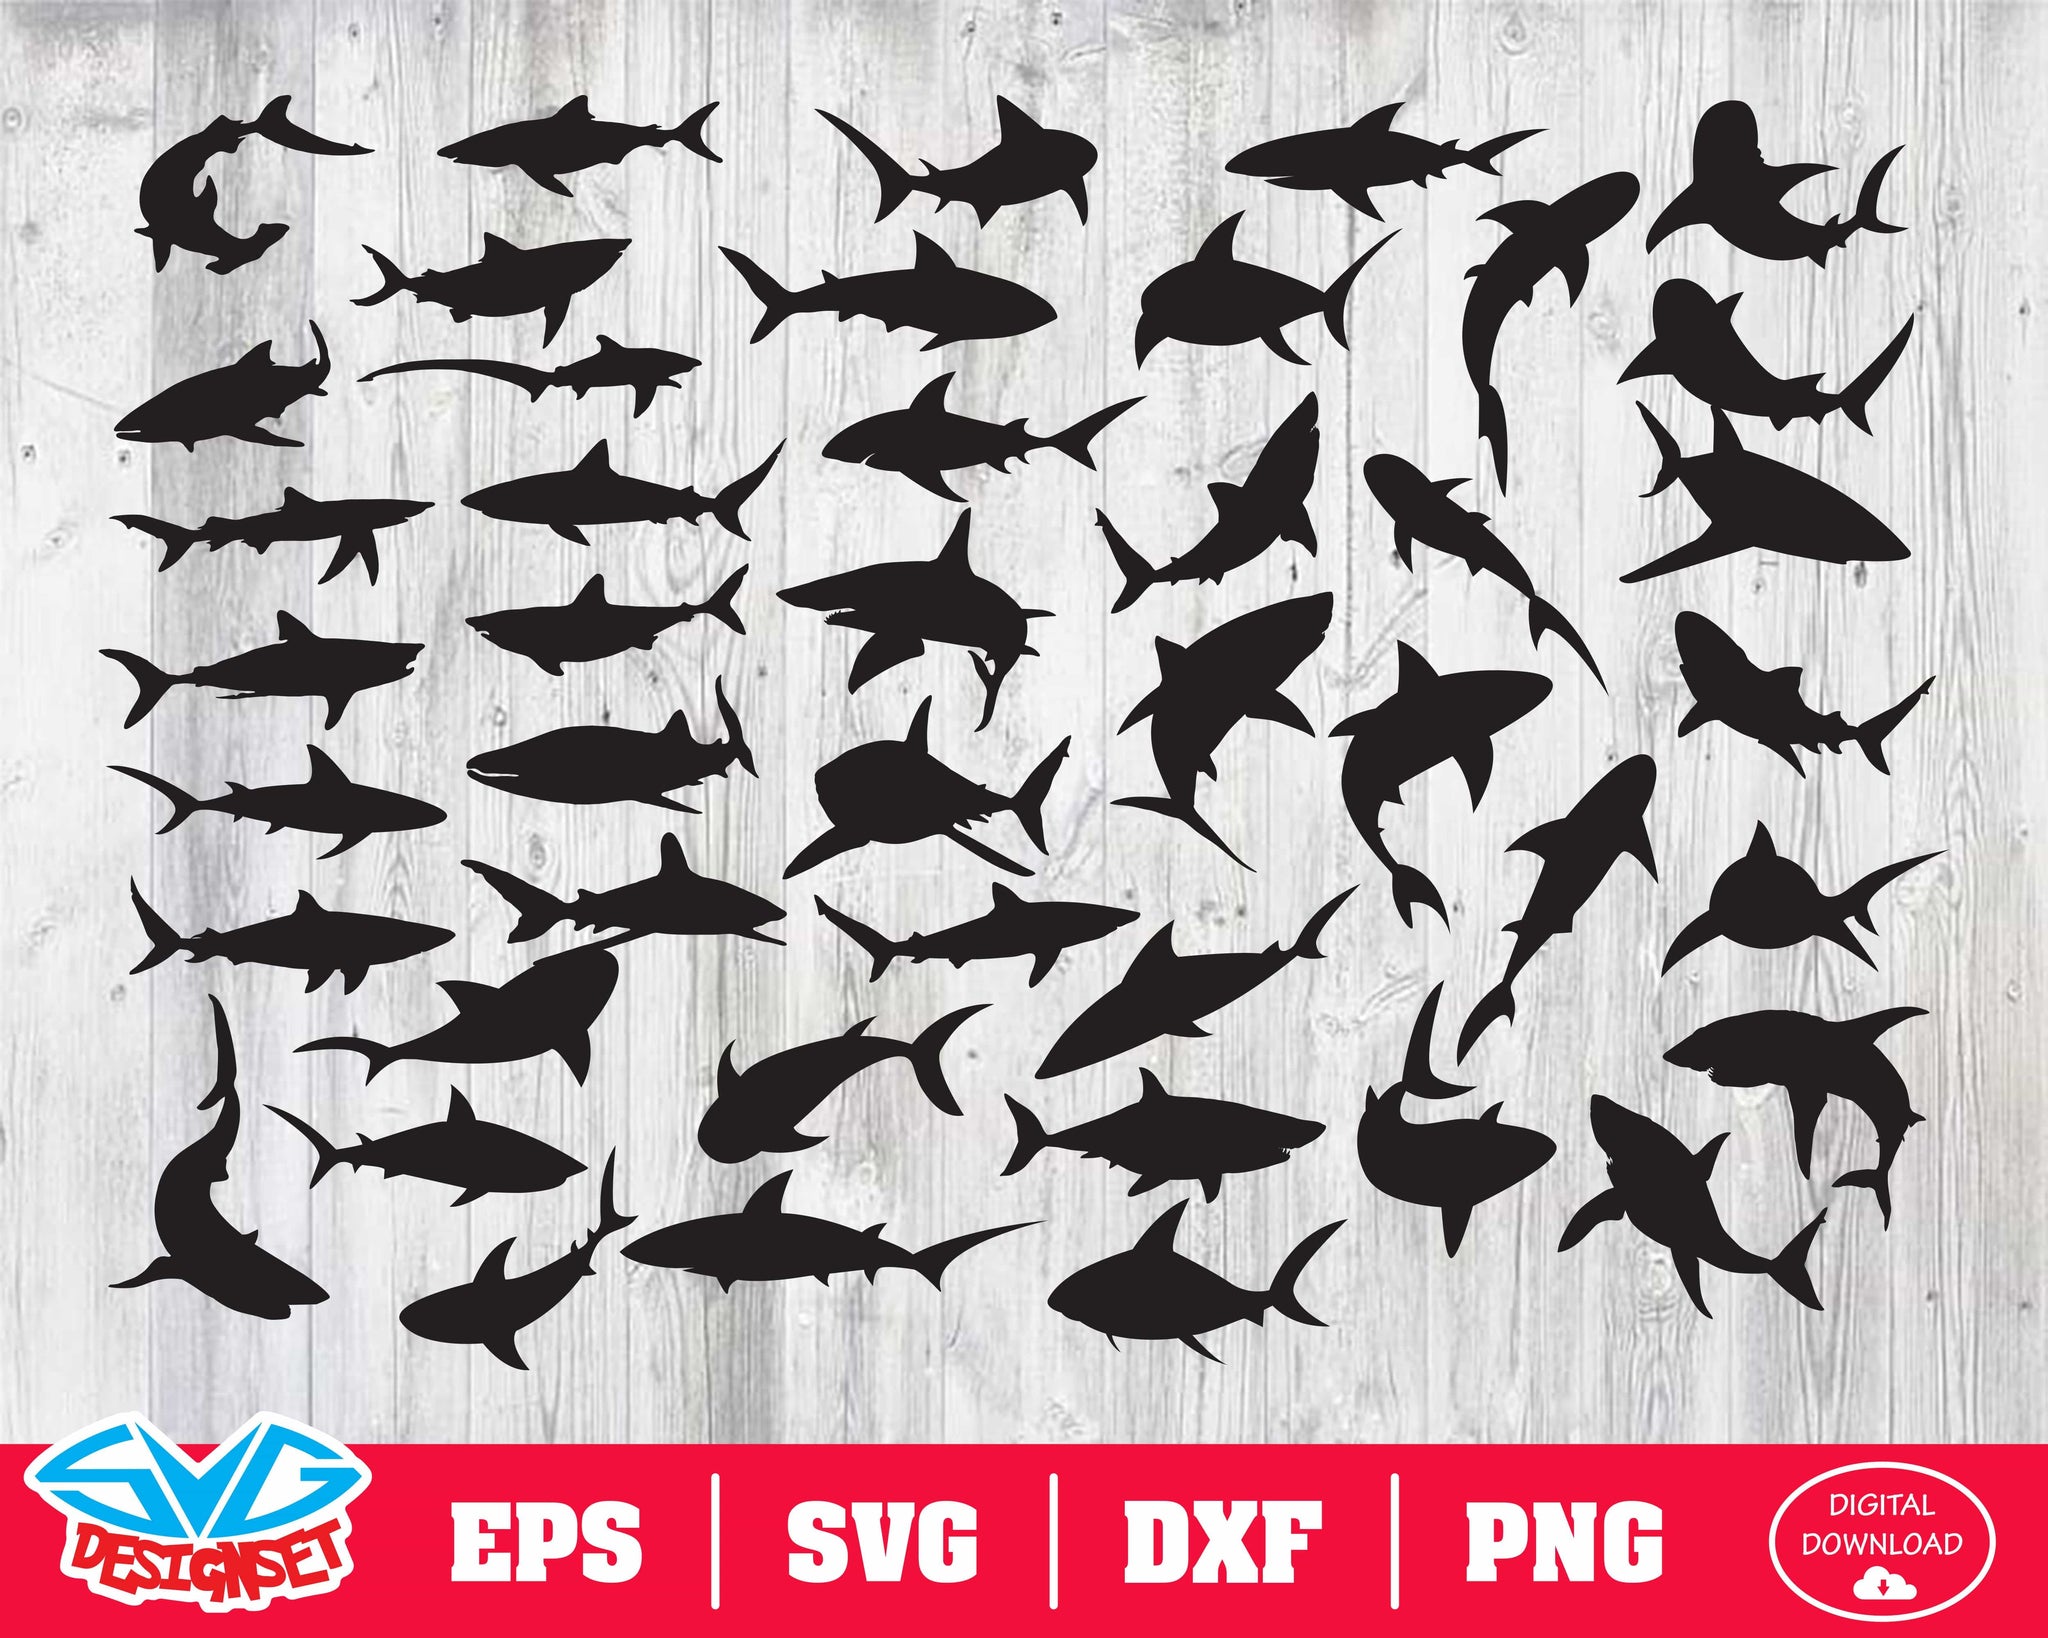 Shark Svg, Dxf, Eps, Png, Clipart, Silhouette and Cutfiles - SVGDesignSets